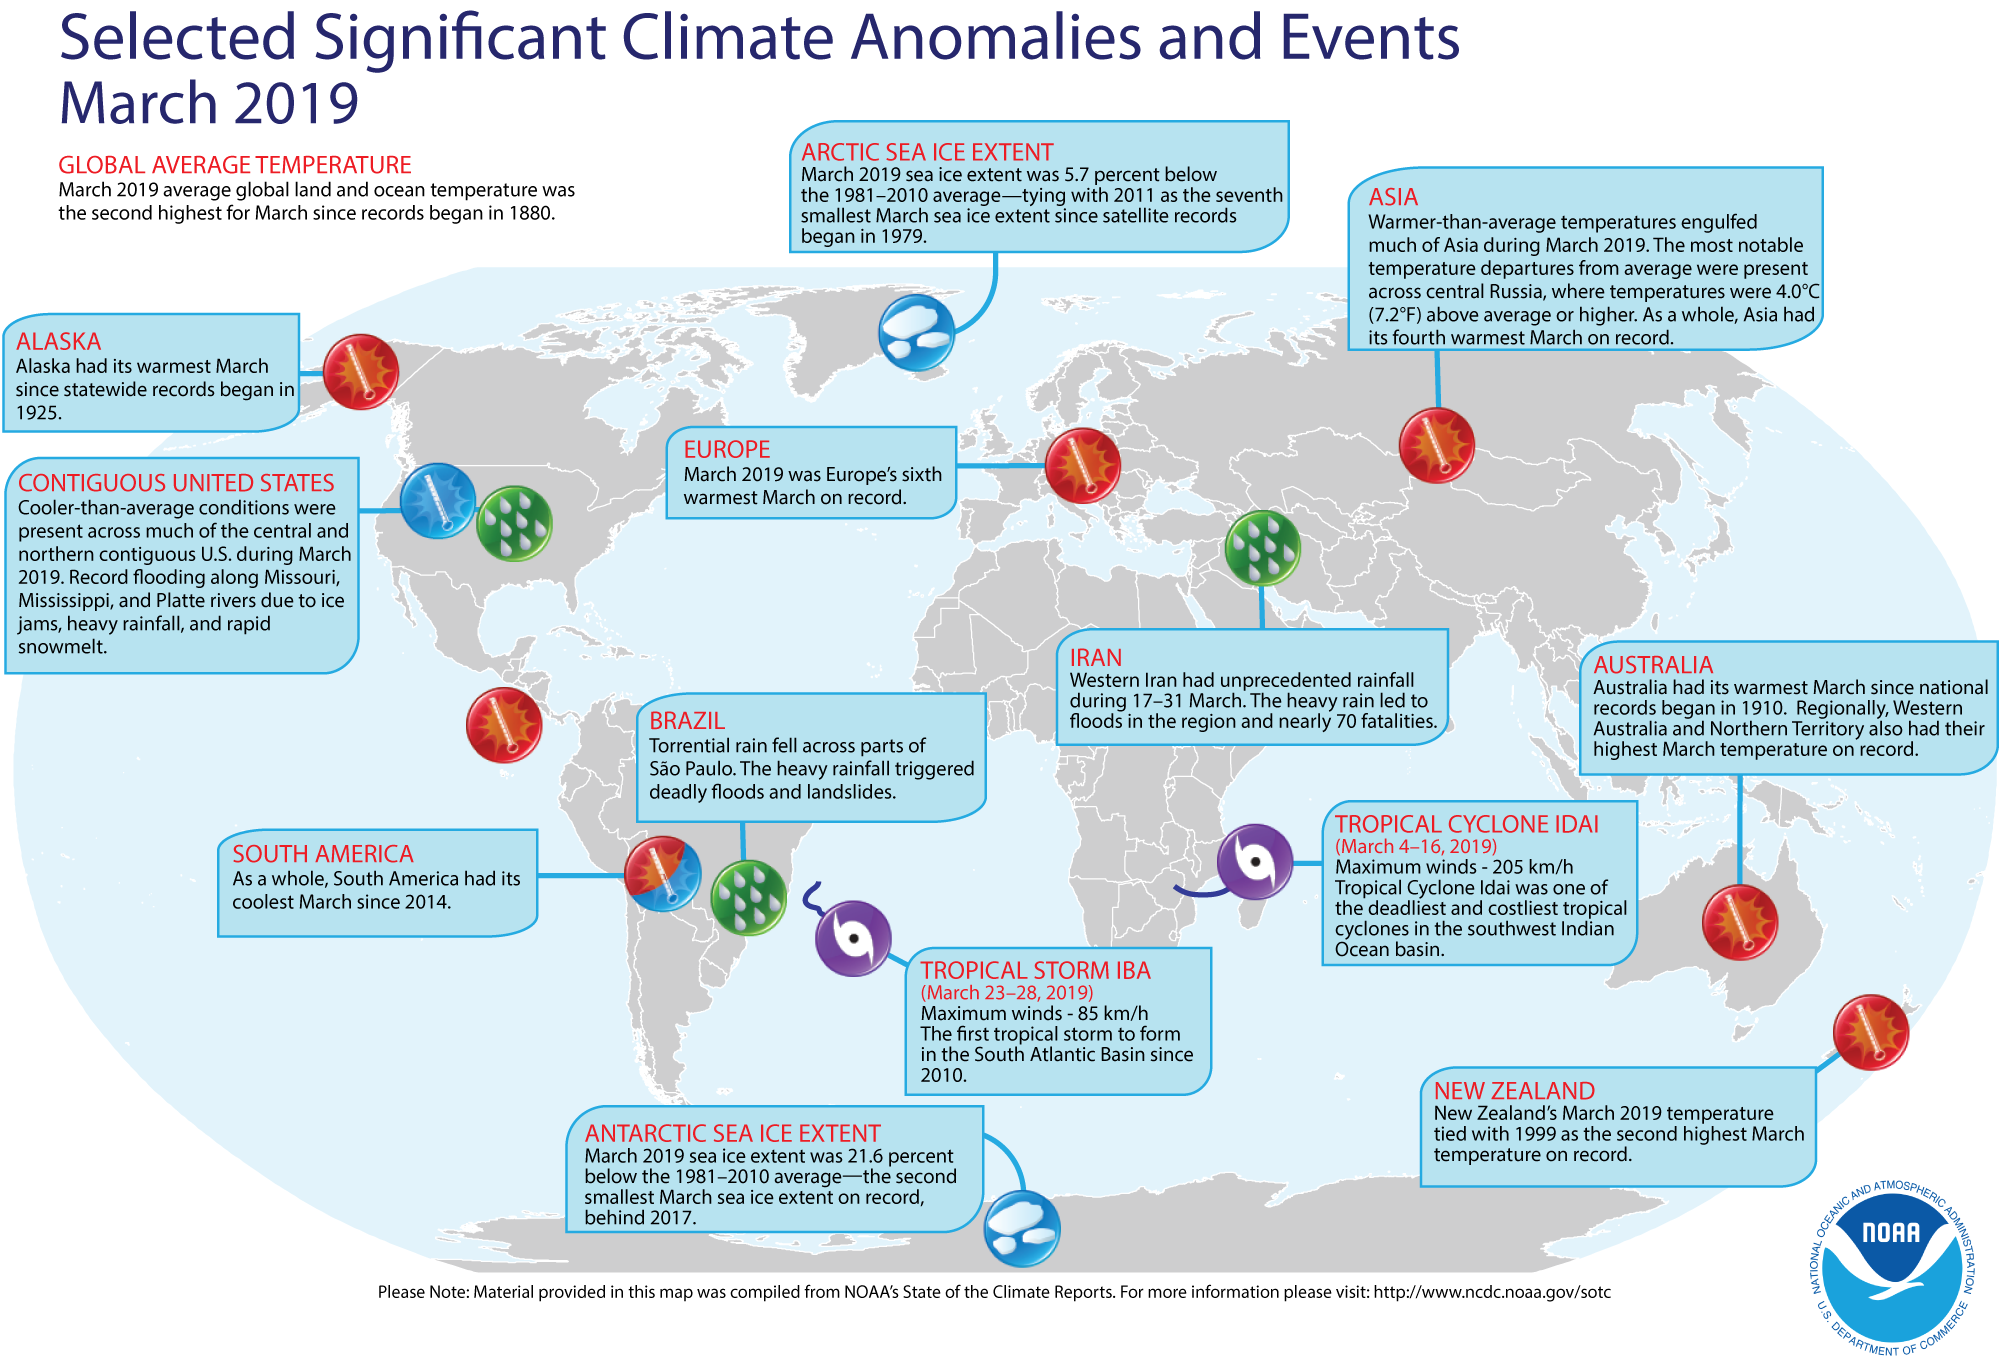 An annotated map of the world showing notable climate events that occurred in March 2019. For details, see the short bulleted list below in our story and more details at http://www.ncdc.noaa.gov/sotc/global/201903.